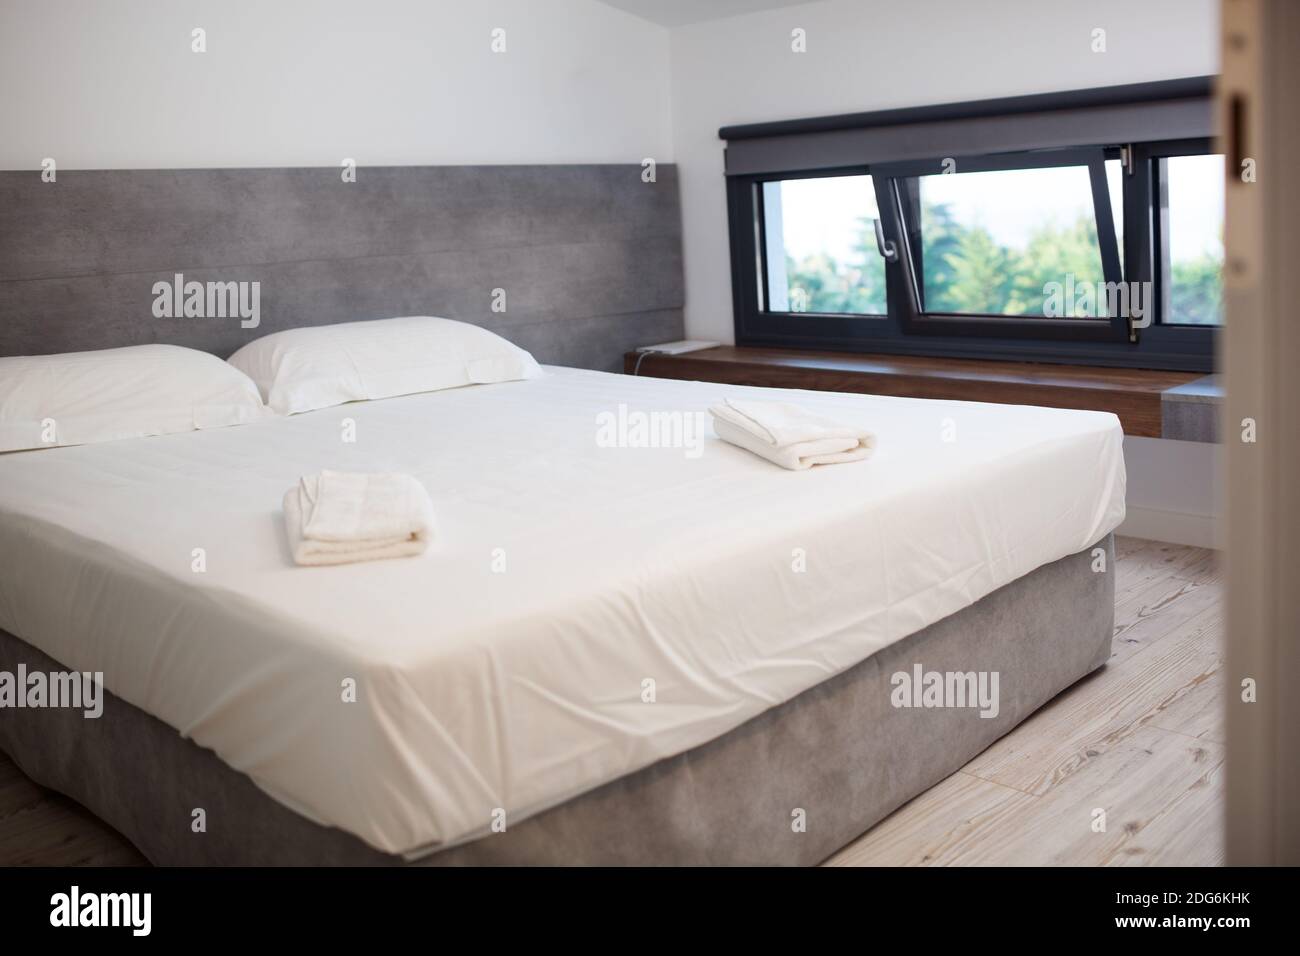 Empty hotel room with king-sized bed Stock Photo